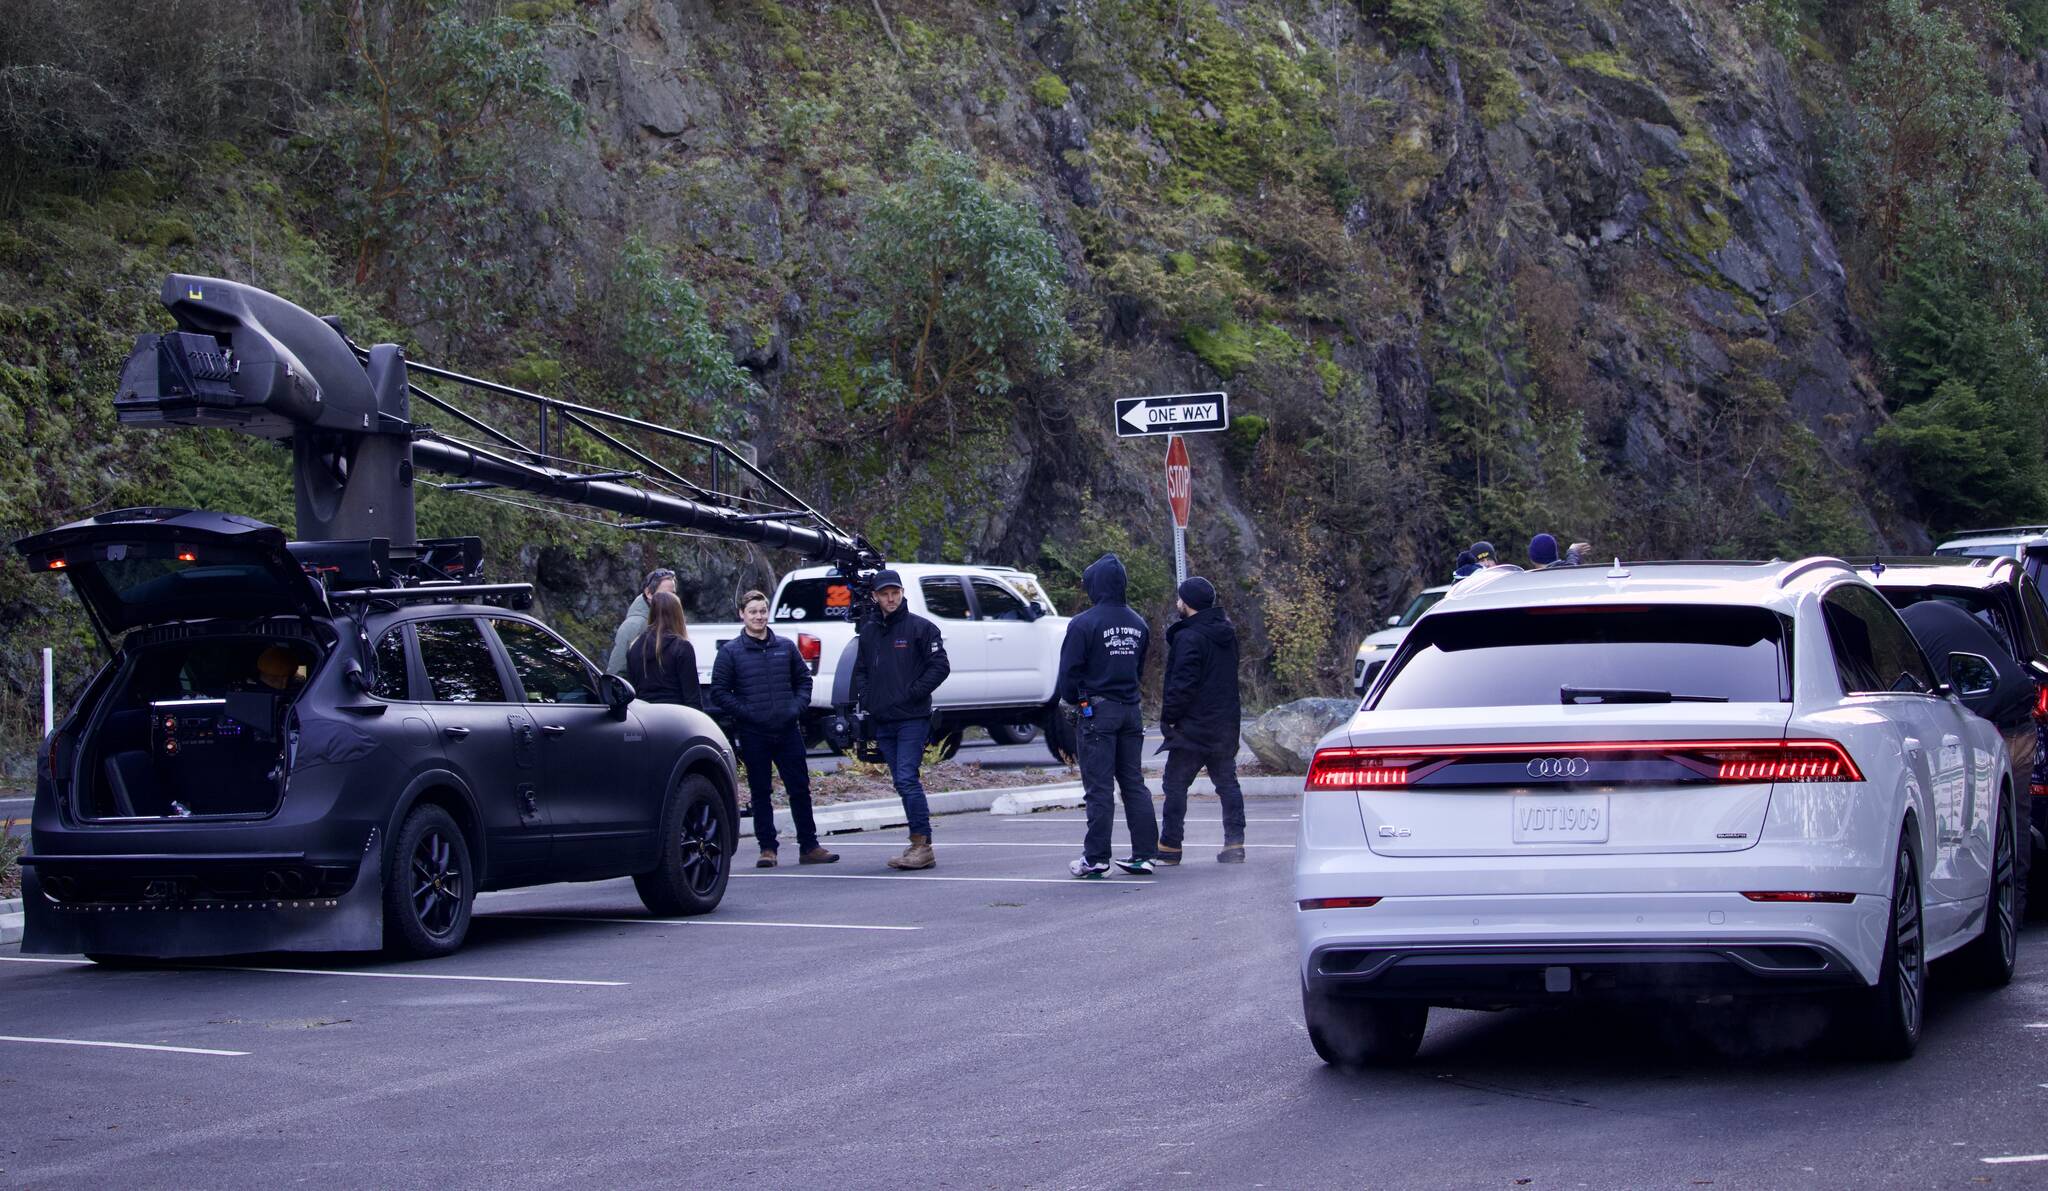 Photo by Rachel Rosen/Whidbey News-Times
Members of Tilt + Creative Production gather in a parking lot adjacent to the deception Pass Bridge where an Audi commercial was filmed early this week.